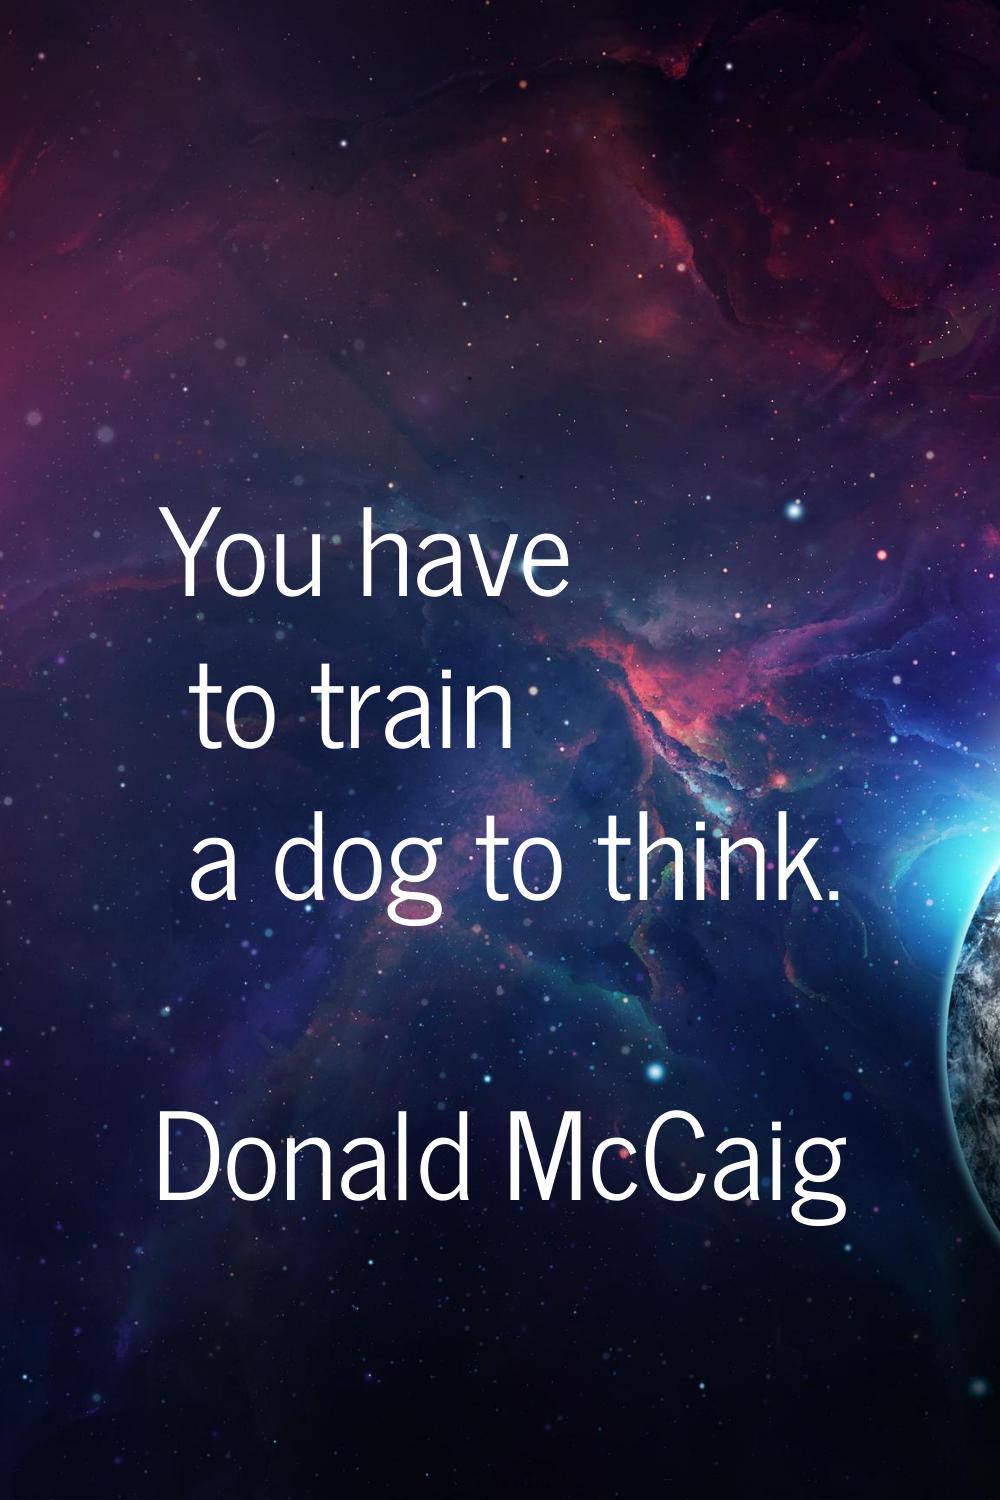 You have to train a dog to think.